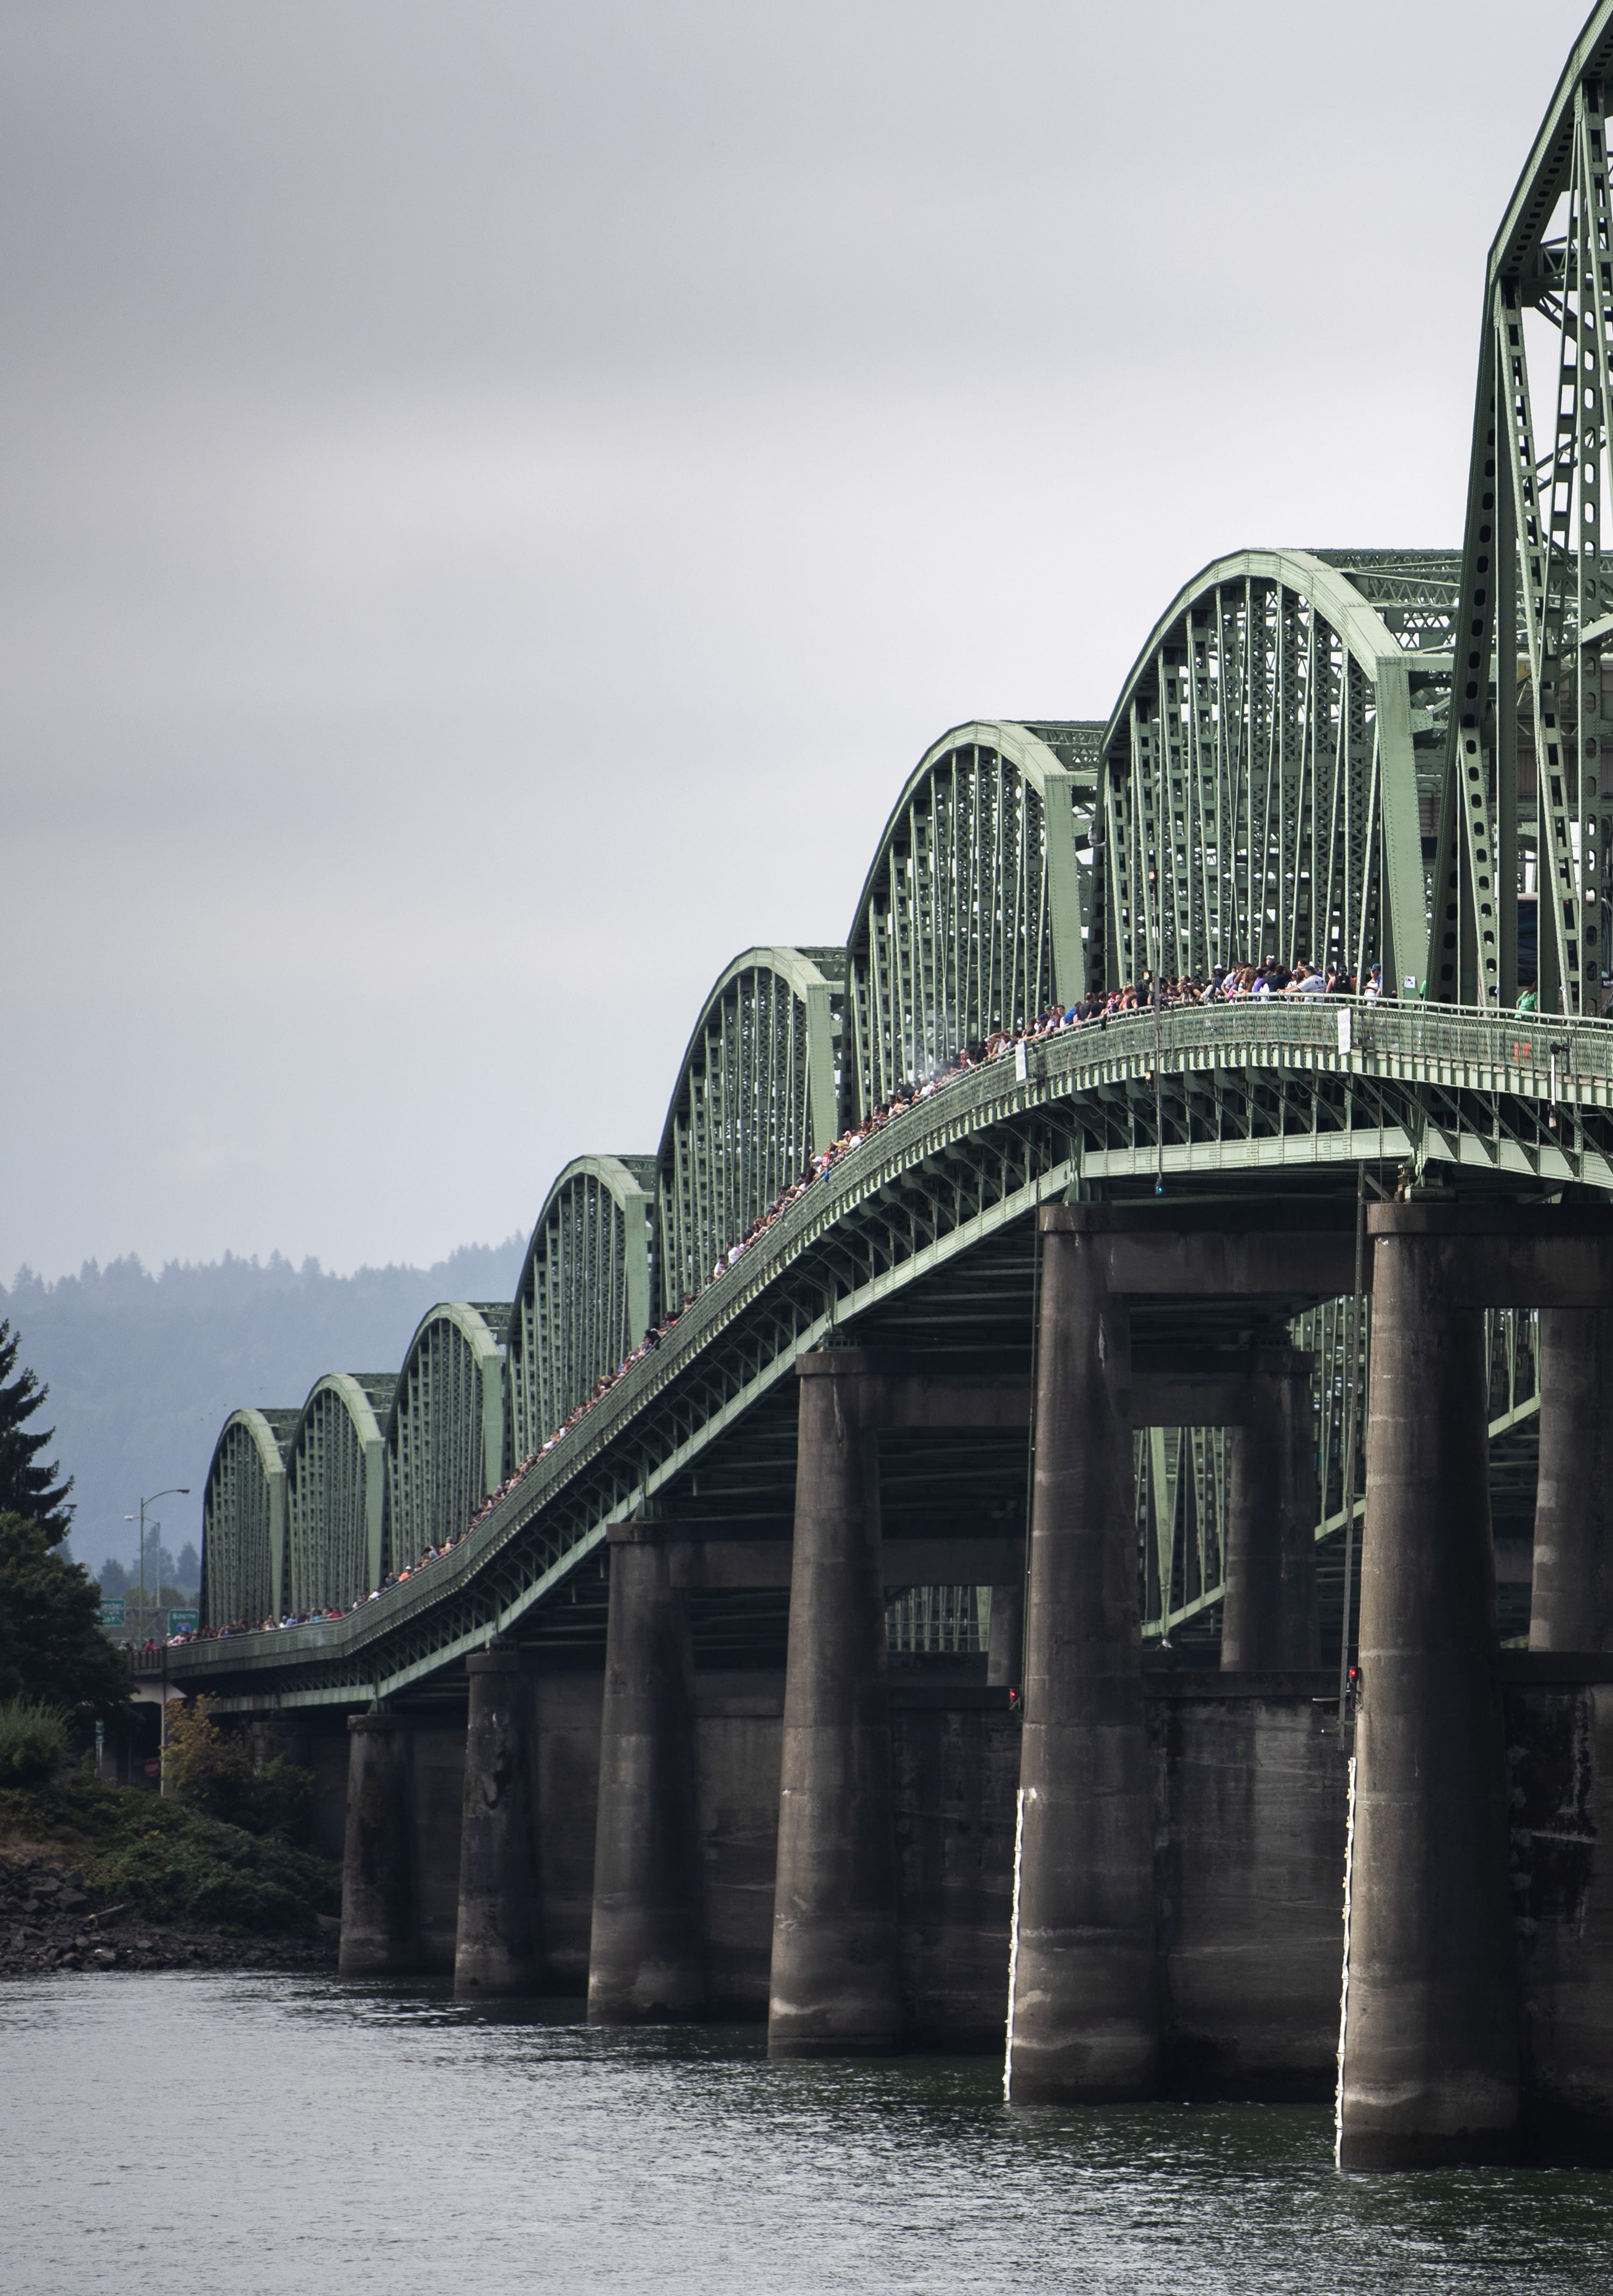 Attendees make their way across the I-5 bridge to meet people walking from the Oregon side during the Hands Across the Bridge event on Monday, September 2, 2019. This day marked the 19th anniversary of the event, in which people in recovery come together to share their stories and celebrate sobriety. More than 900 people from the Washington side of the Columbia River walked out onto the bridge to meet the attendees walking from the Oregon side.